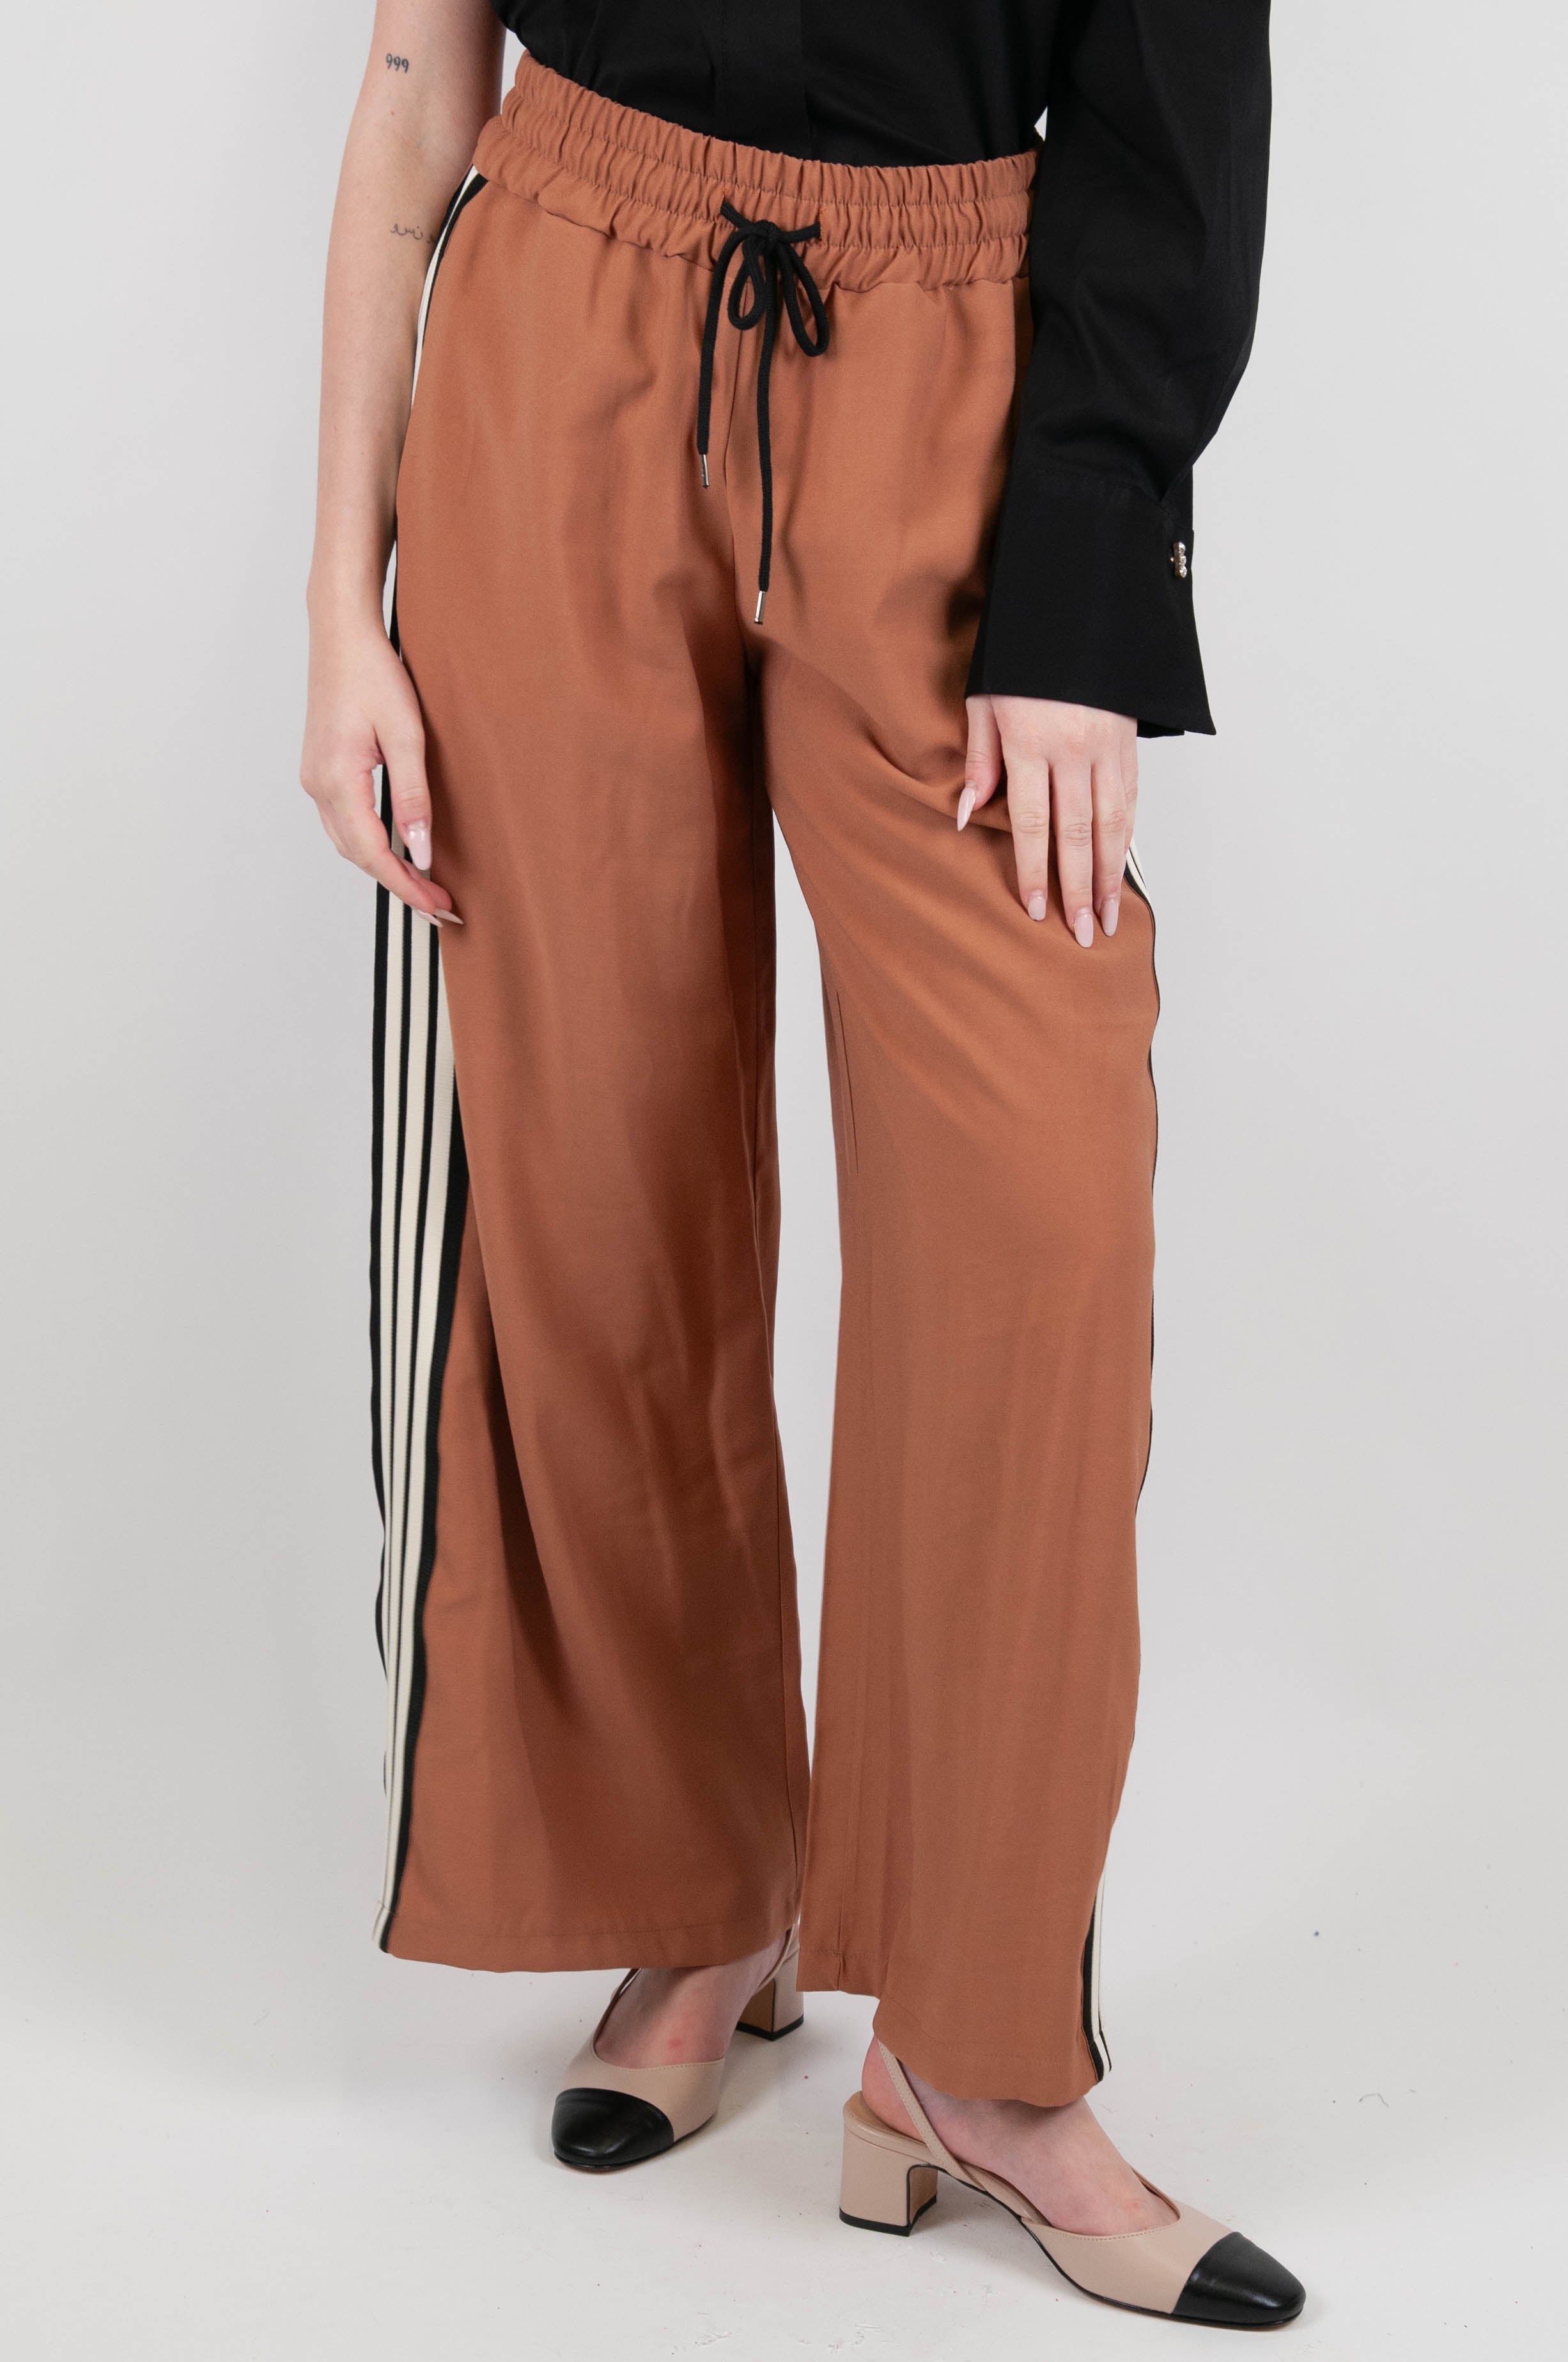 Tension in - Palazzo trousers with contrasting side bands